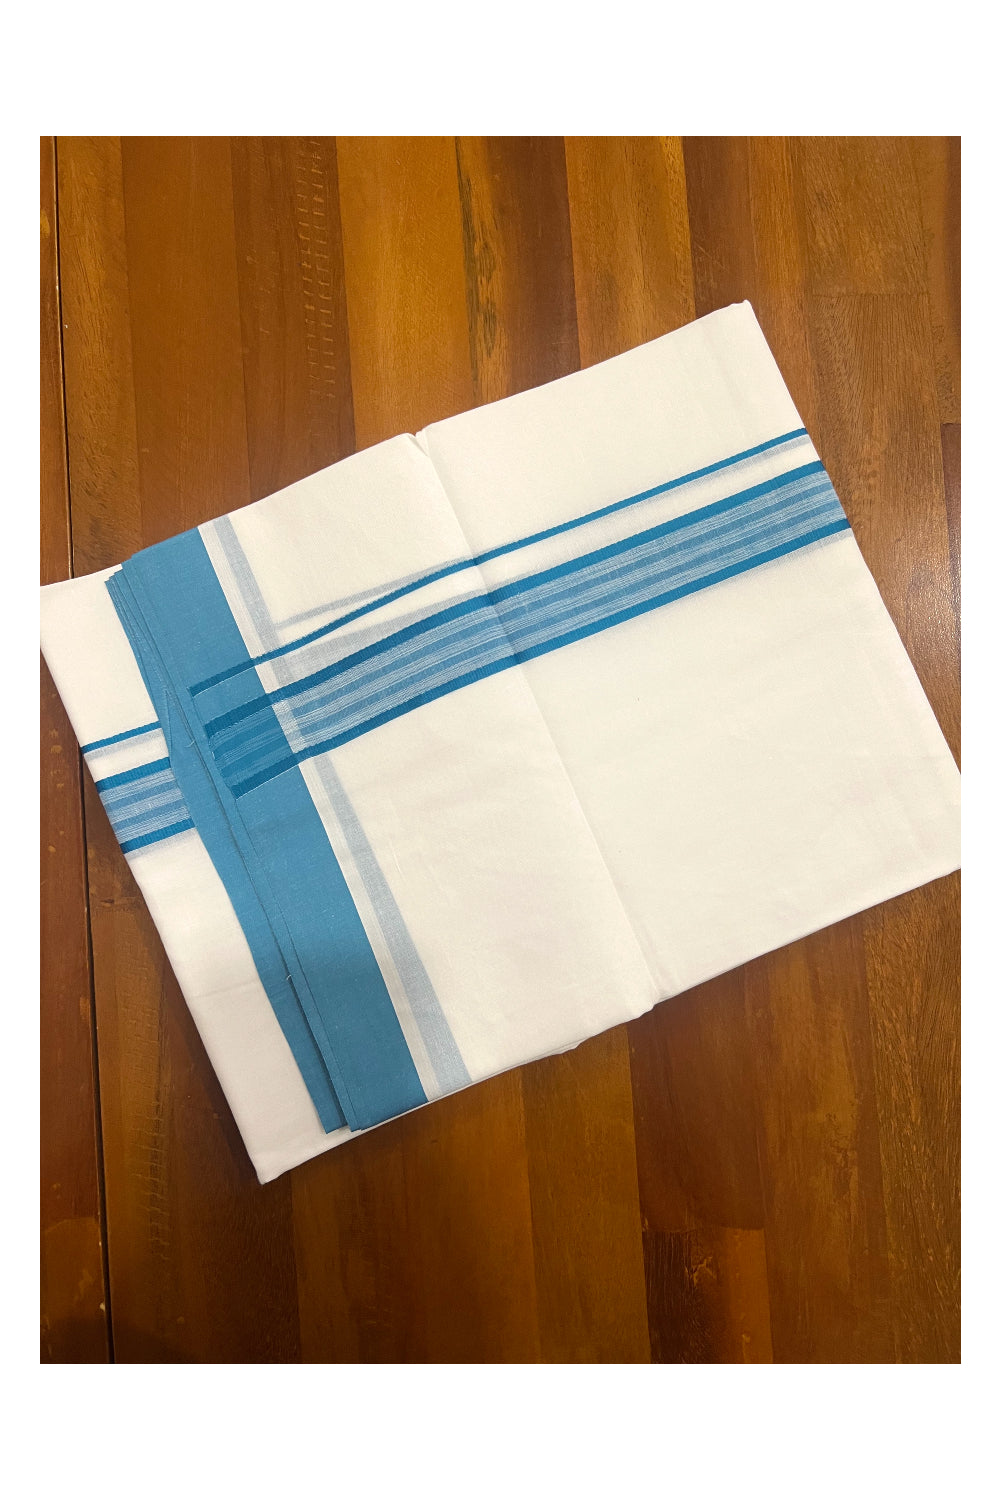 Pure White Cotton Double Mundu with Blue Border (South Indian Dhoti)